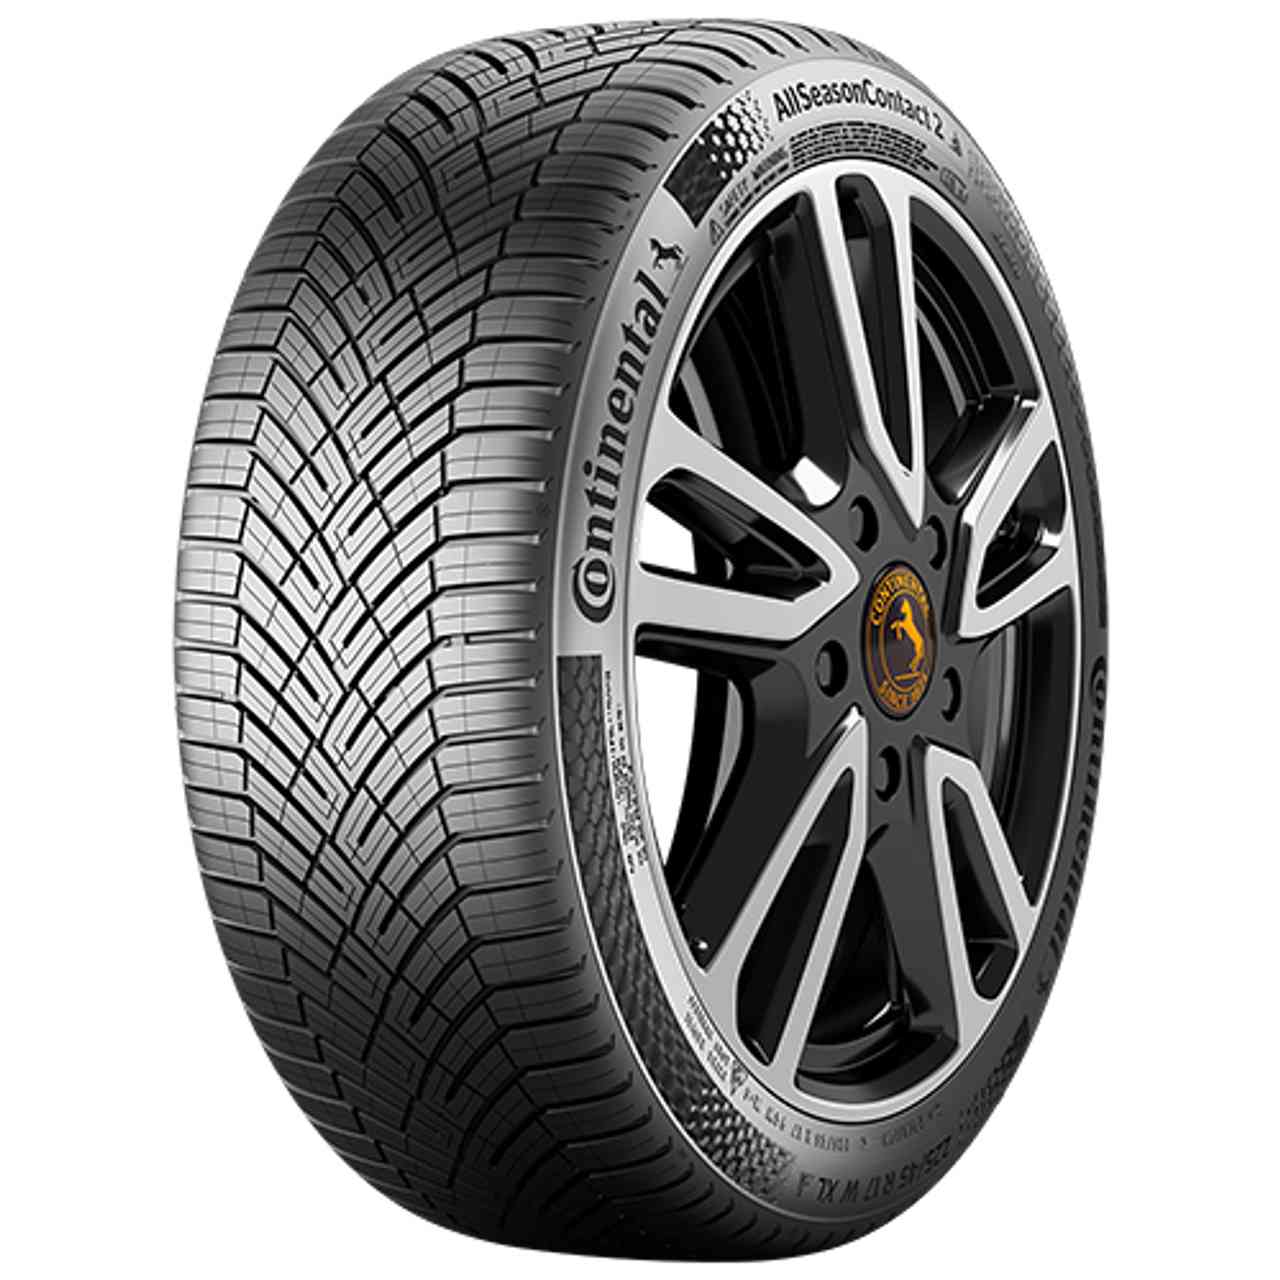 CONTINENTAL ALLSEASONCONTACT 2 (EVc) 225/55R18 102V BSW